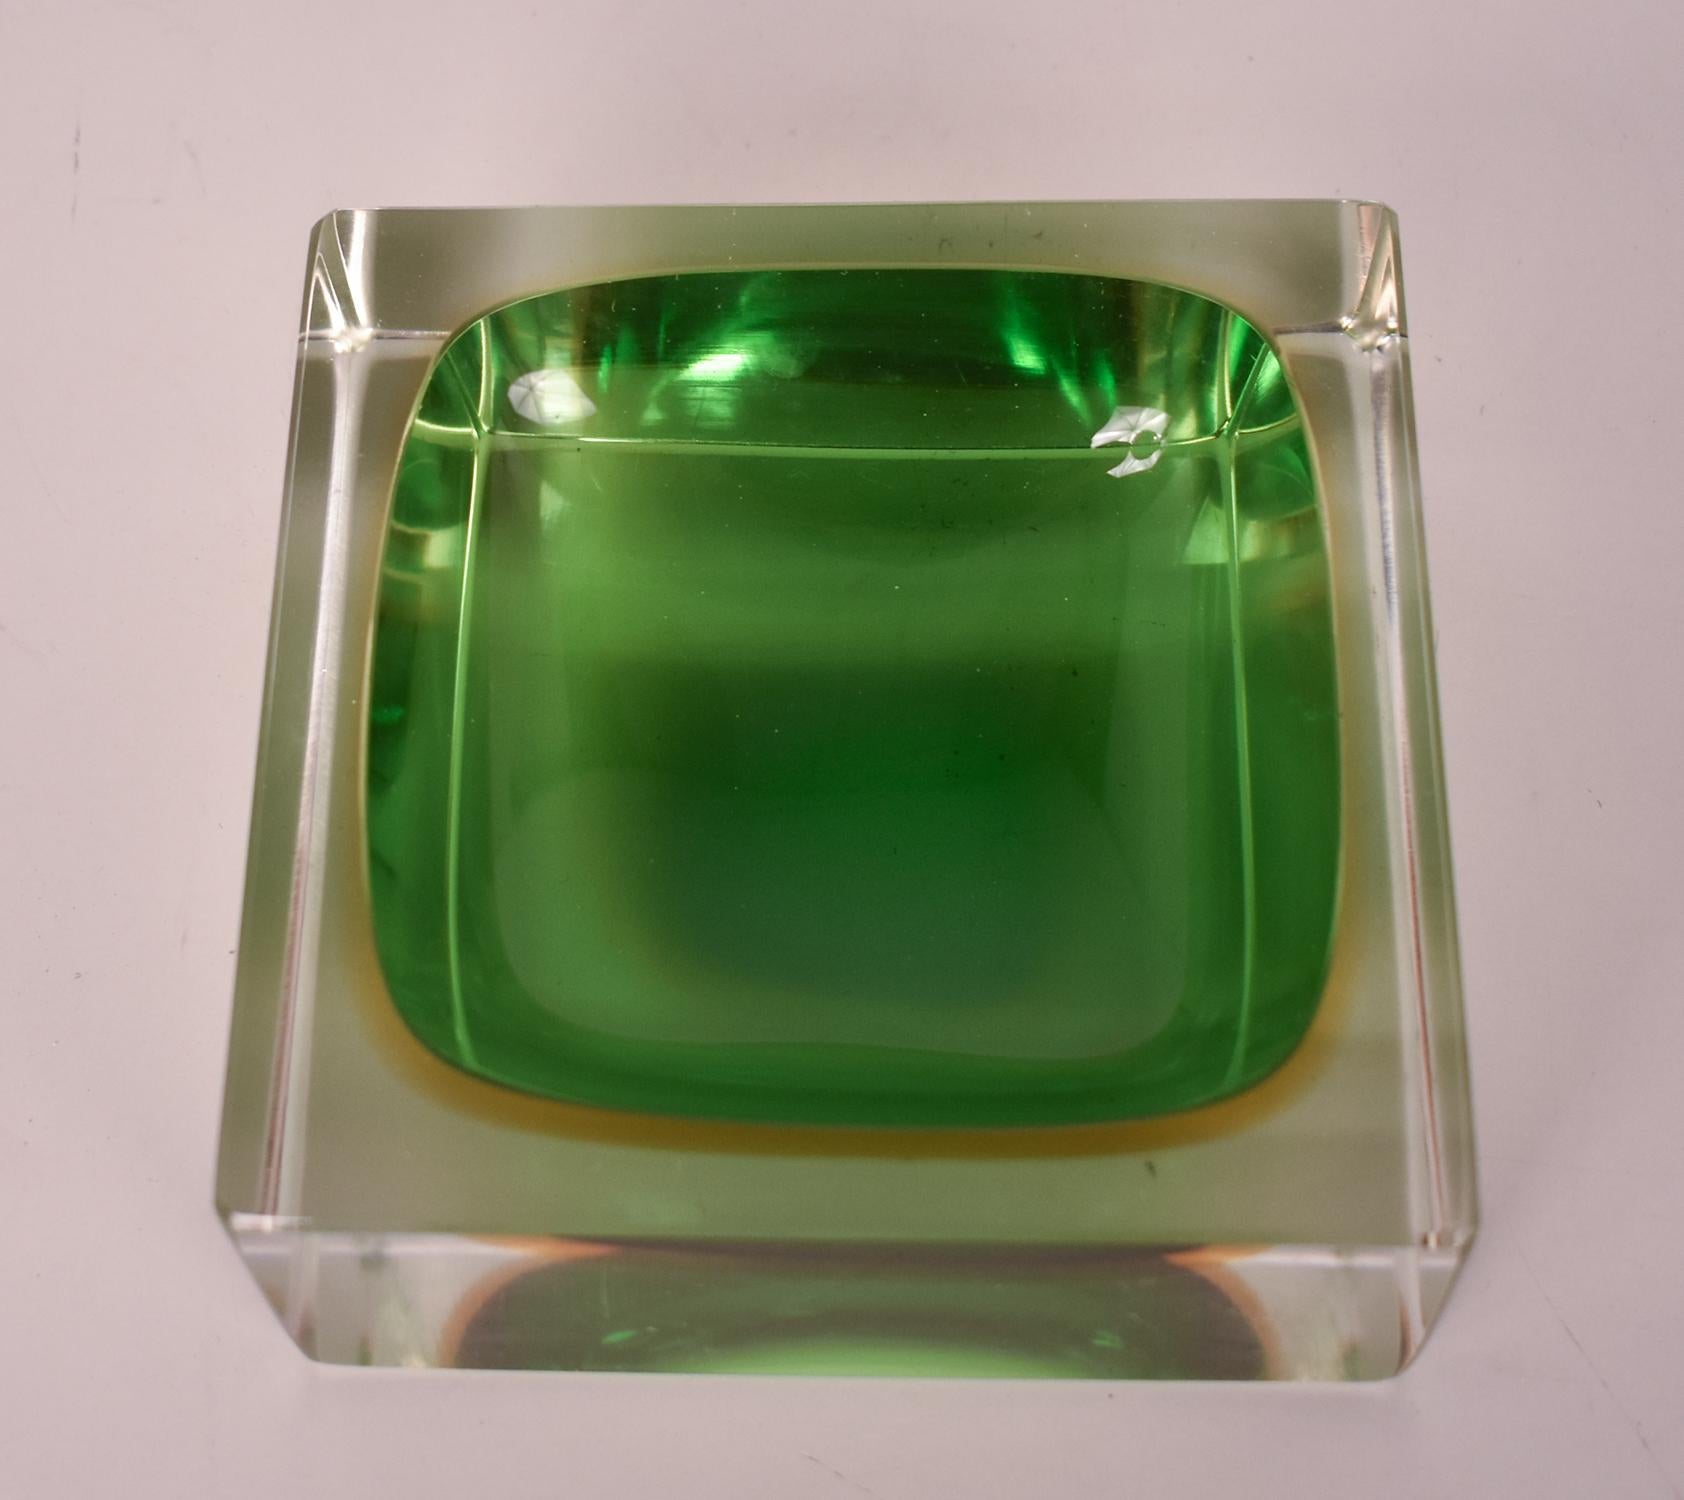  Large Murano Green Glass Sommerso Bowl  Flavio Poli, Italy, 1970s For Sale 2